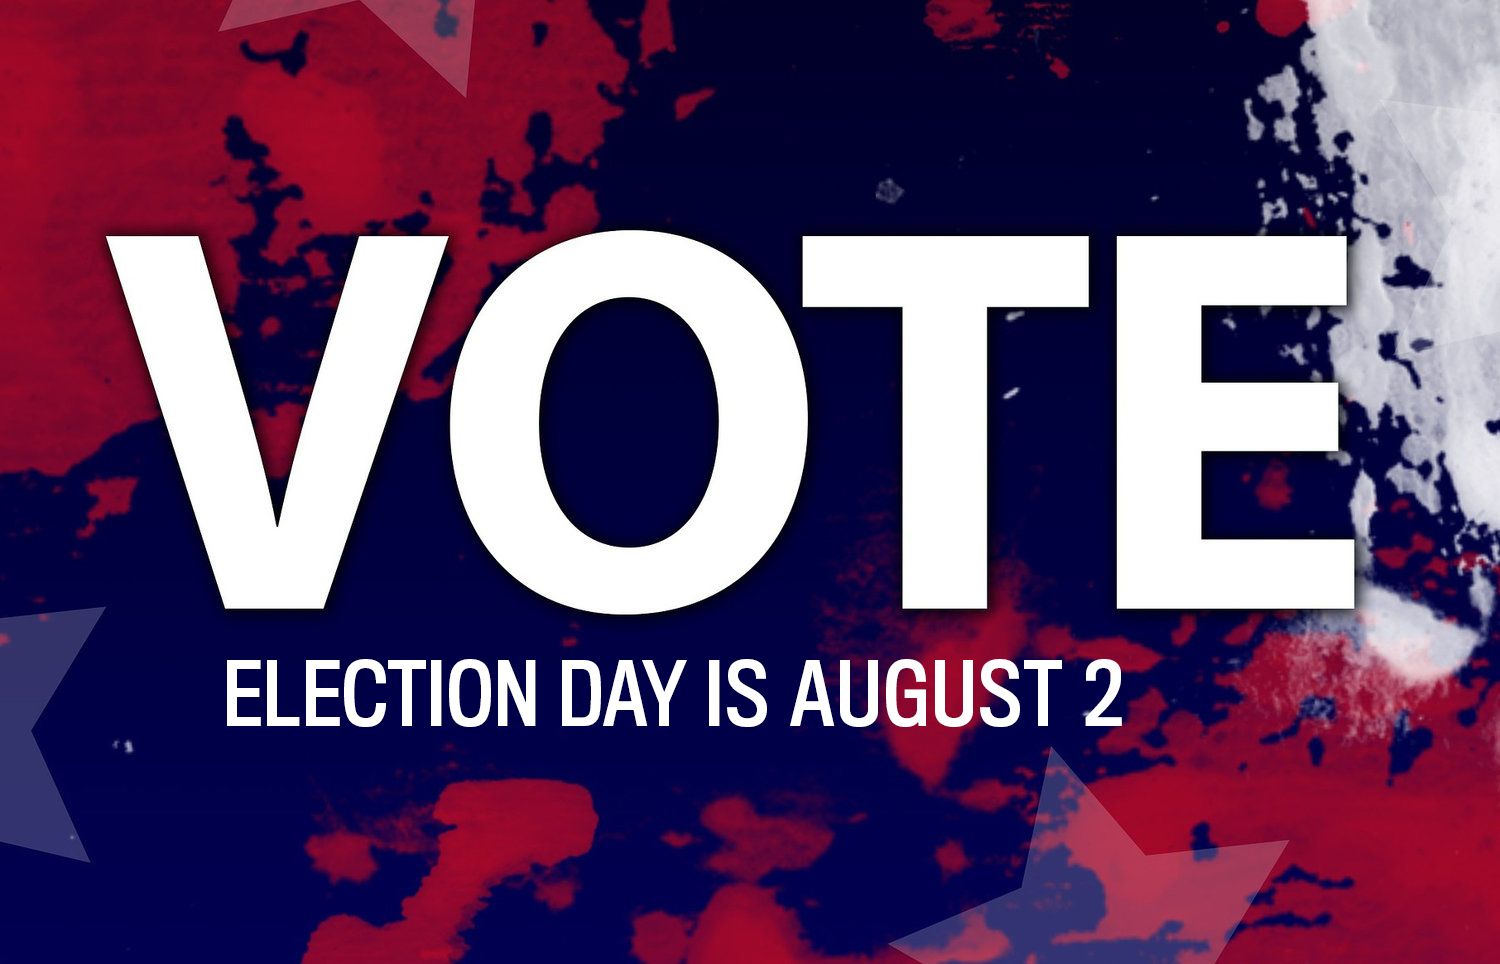 Election Day is August 2nd — VOTE!